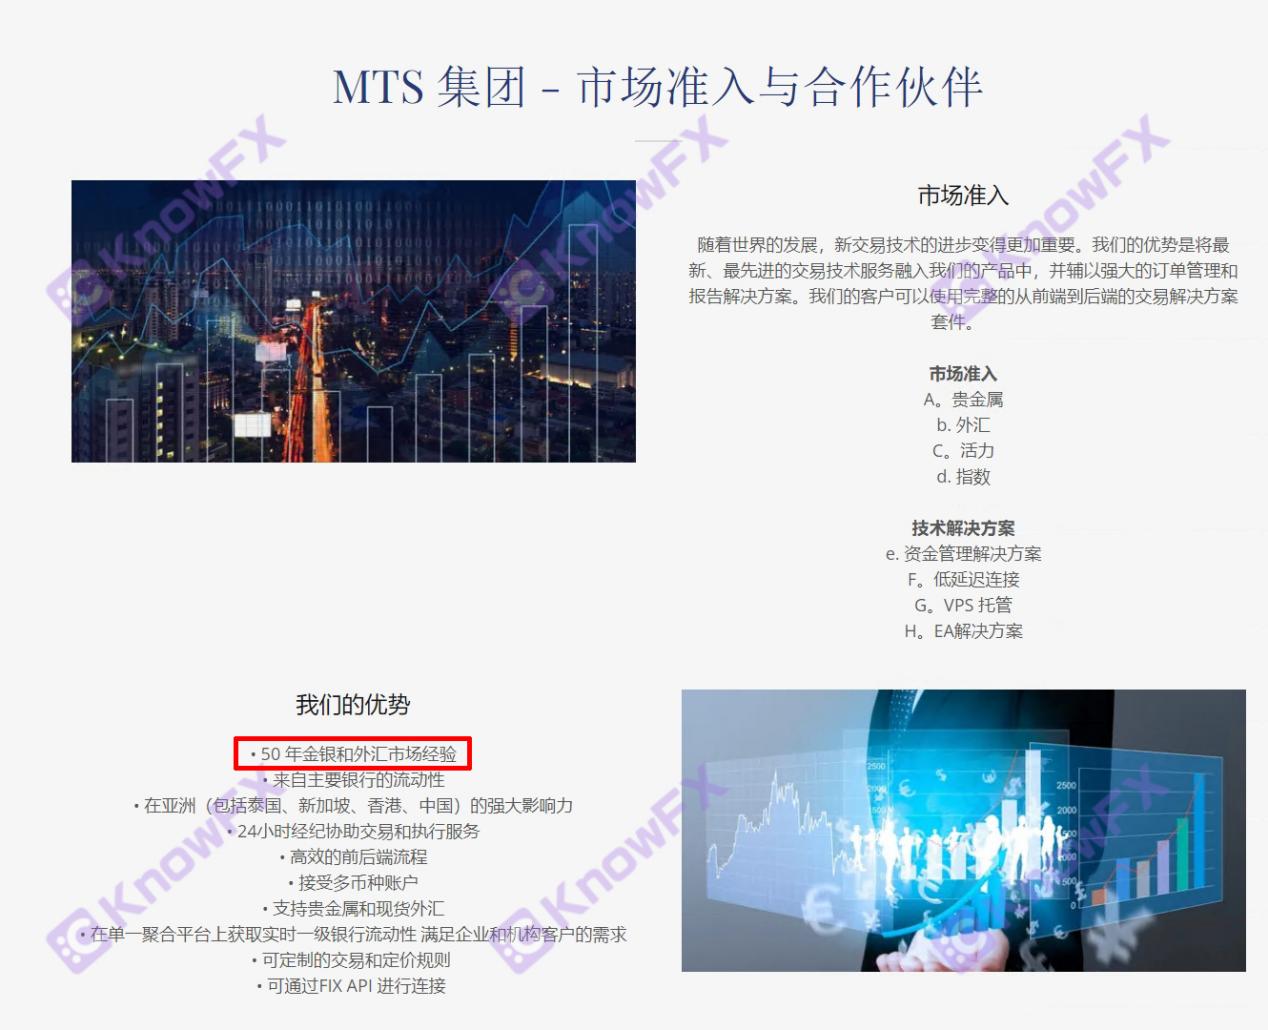 The official website of the brokerage MTS Prime is engaged in false publicity, no trading platform, and there is no physical company in London, England!Intersection-第3张图片-要懂汇圈网